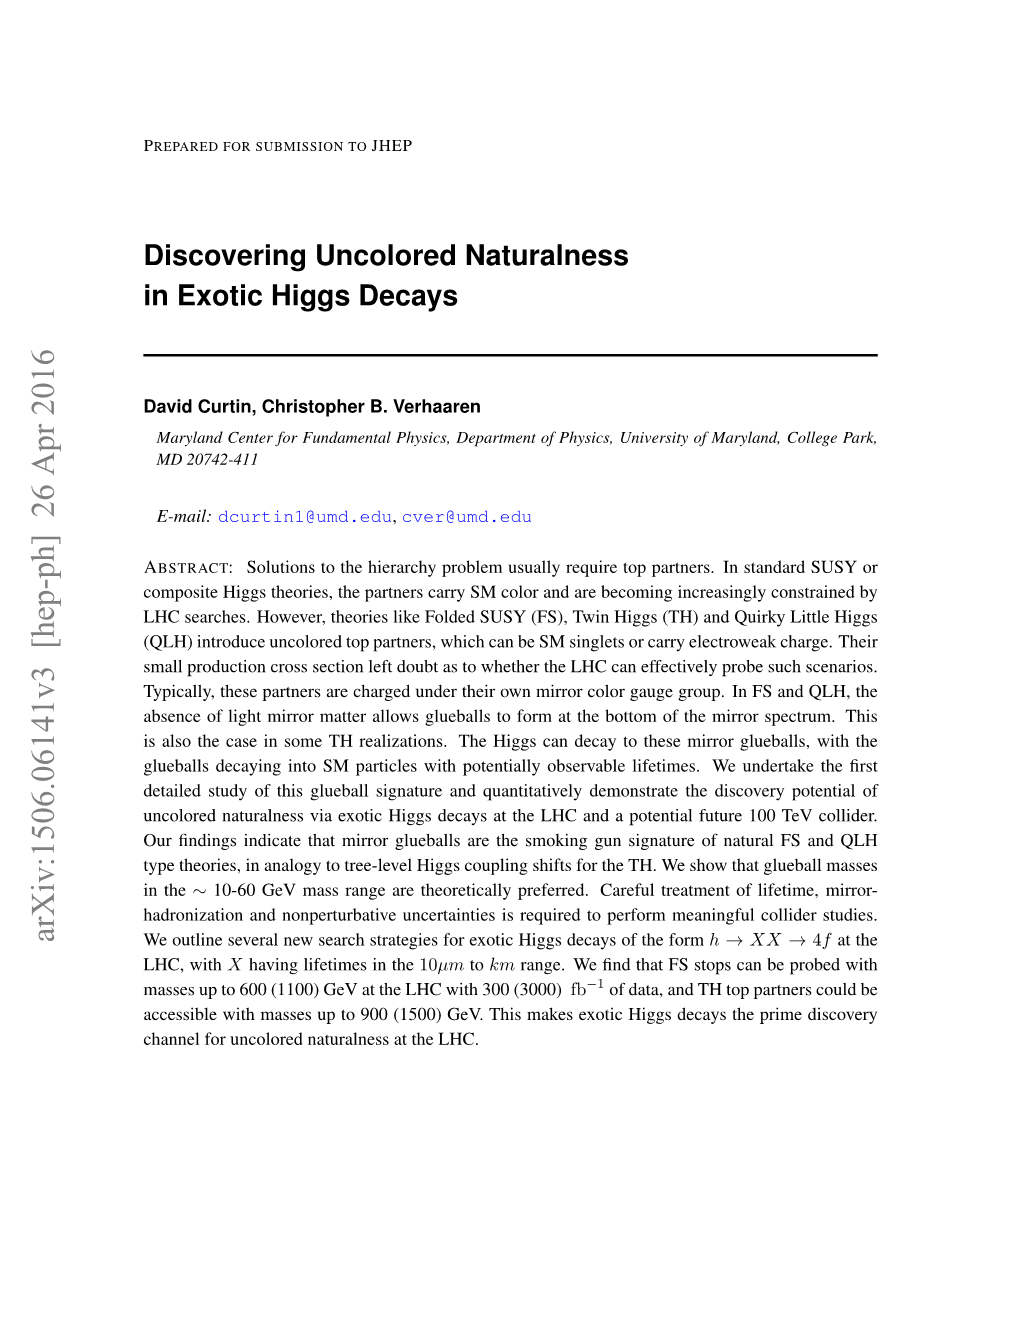 Discovering Uncolored Naturalness in Exotic Higgs Decays